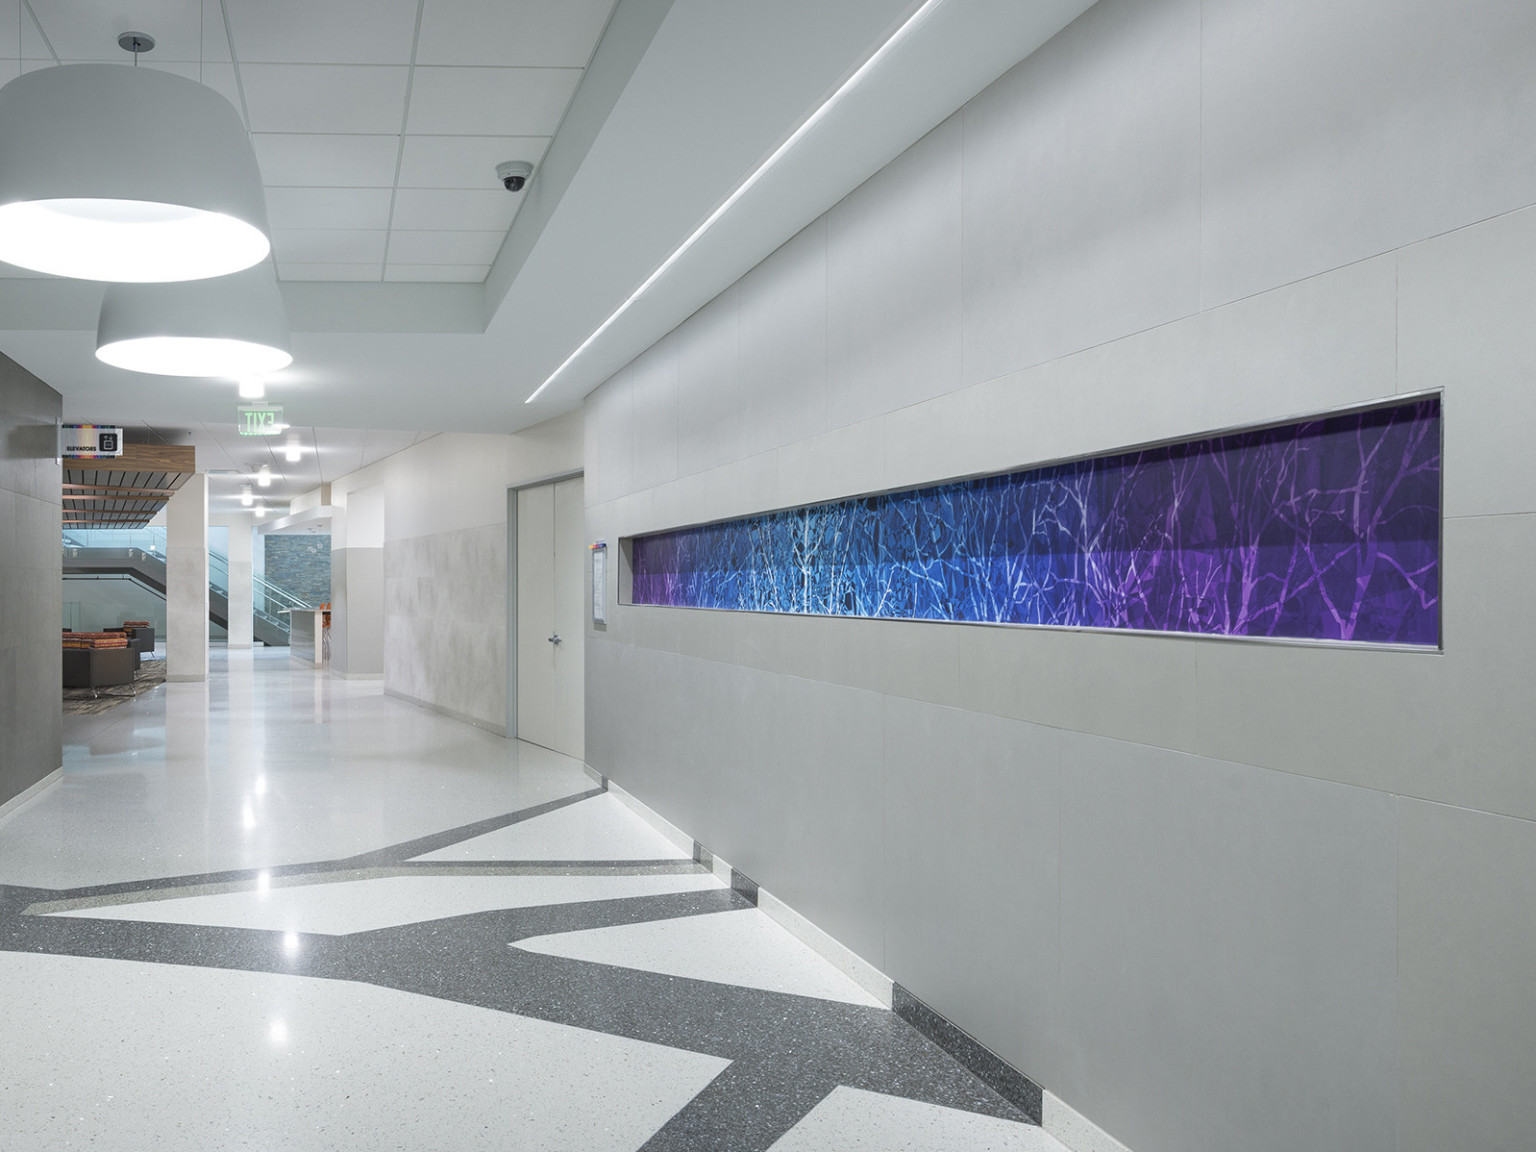 Line pattern on floor leading up to grey wall of hallway with stripe of blue and purple mural, circular light fixtures above